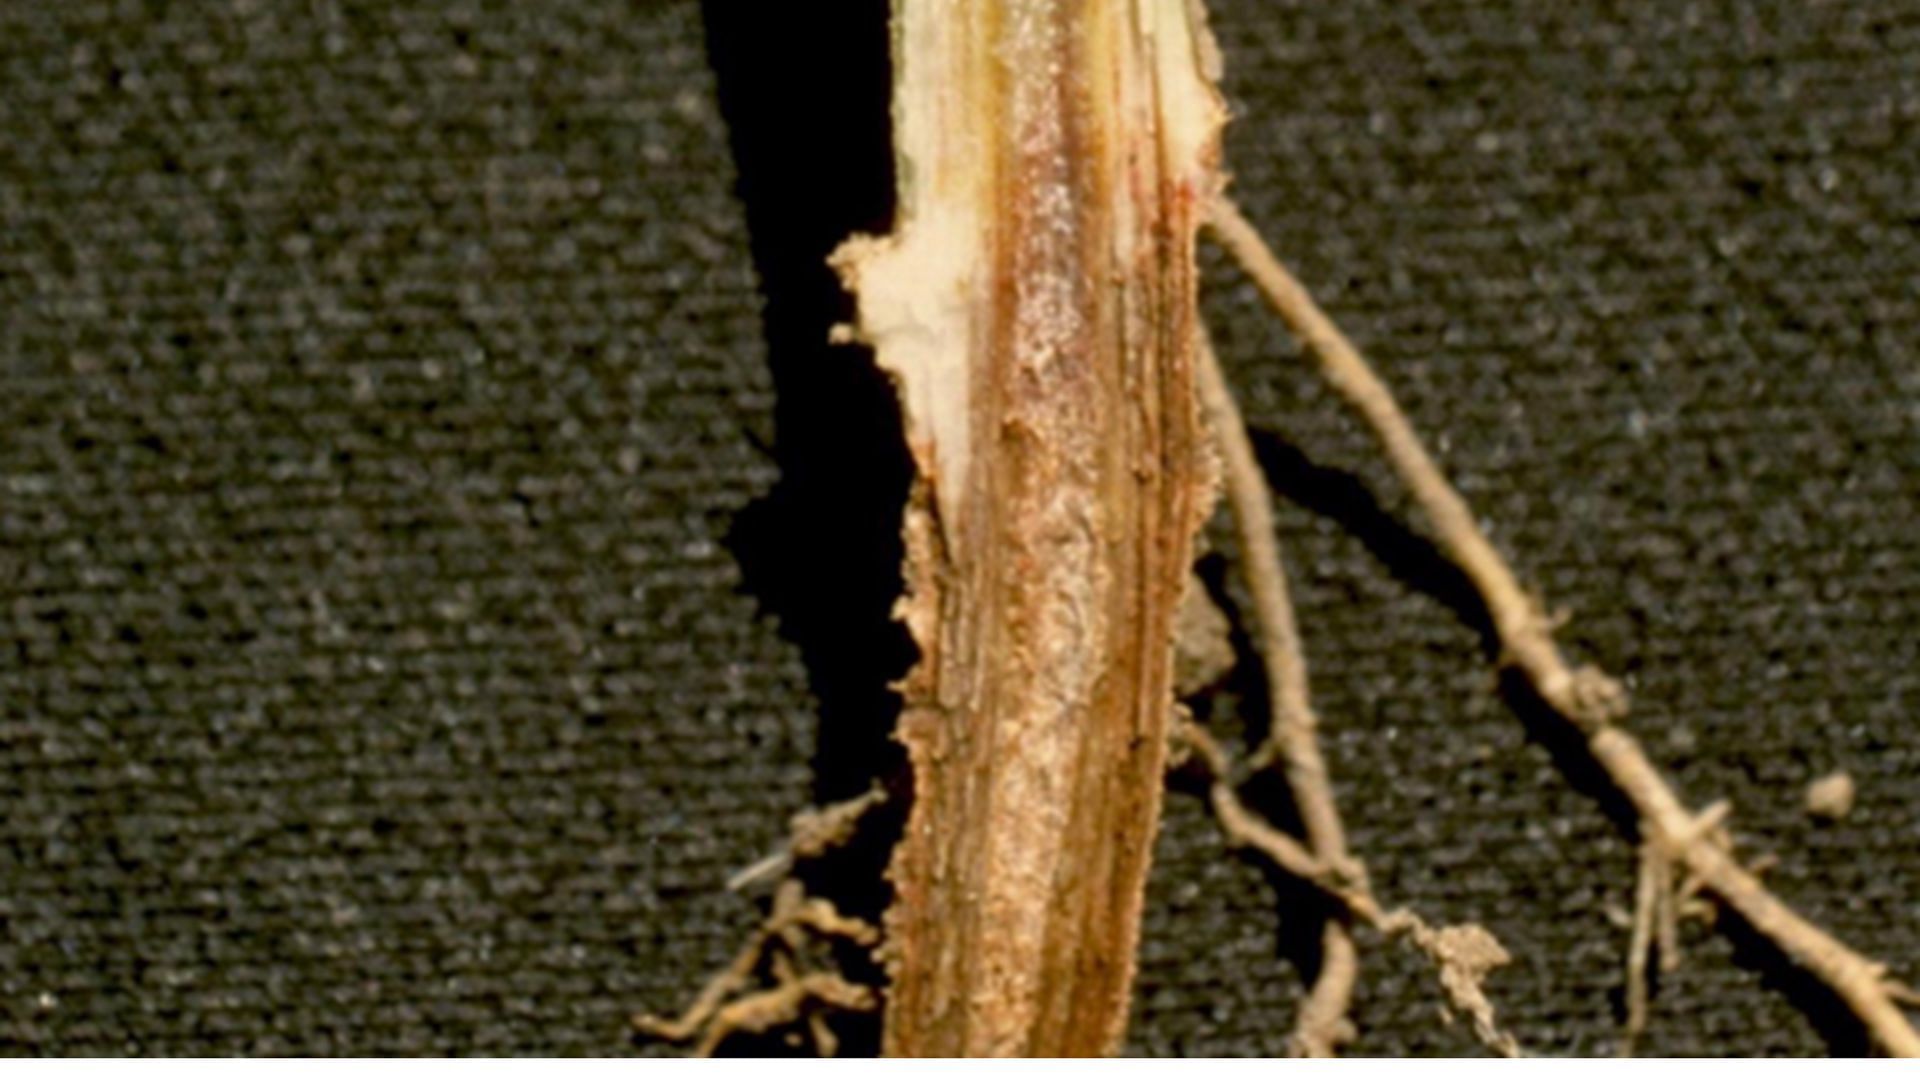 Root rot spreadsquickly and causes wilting